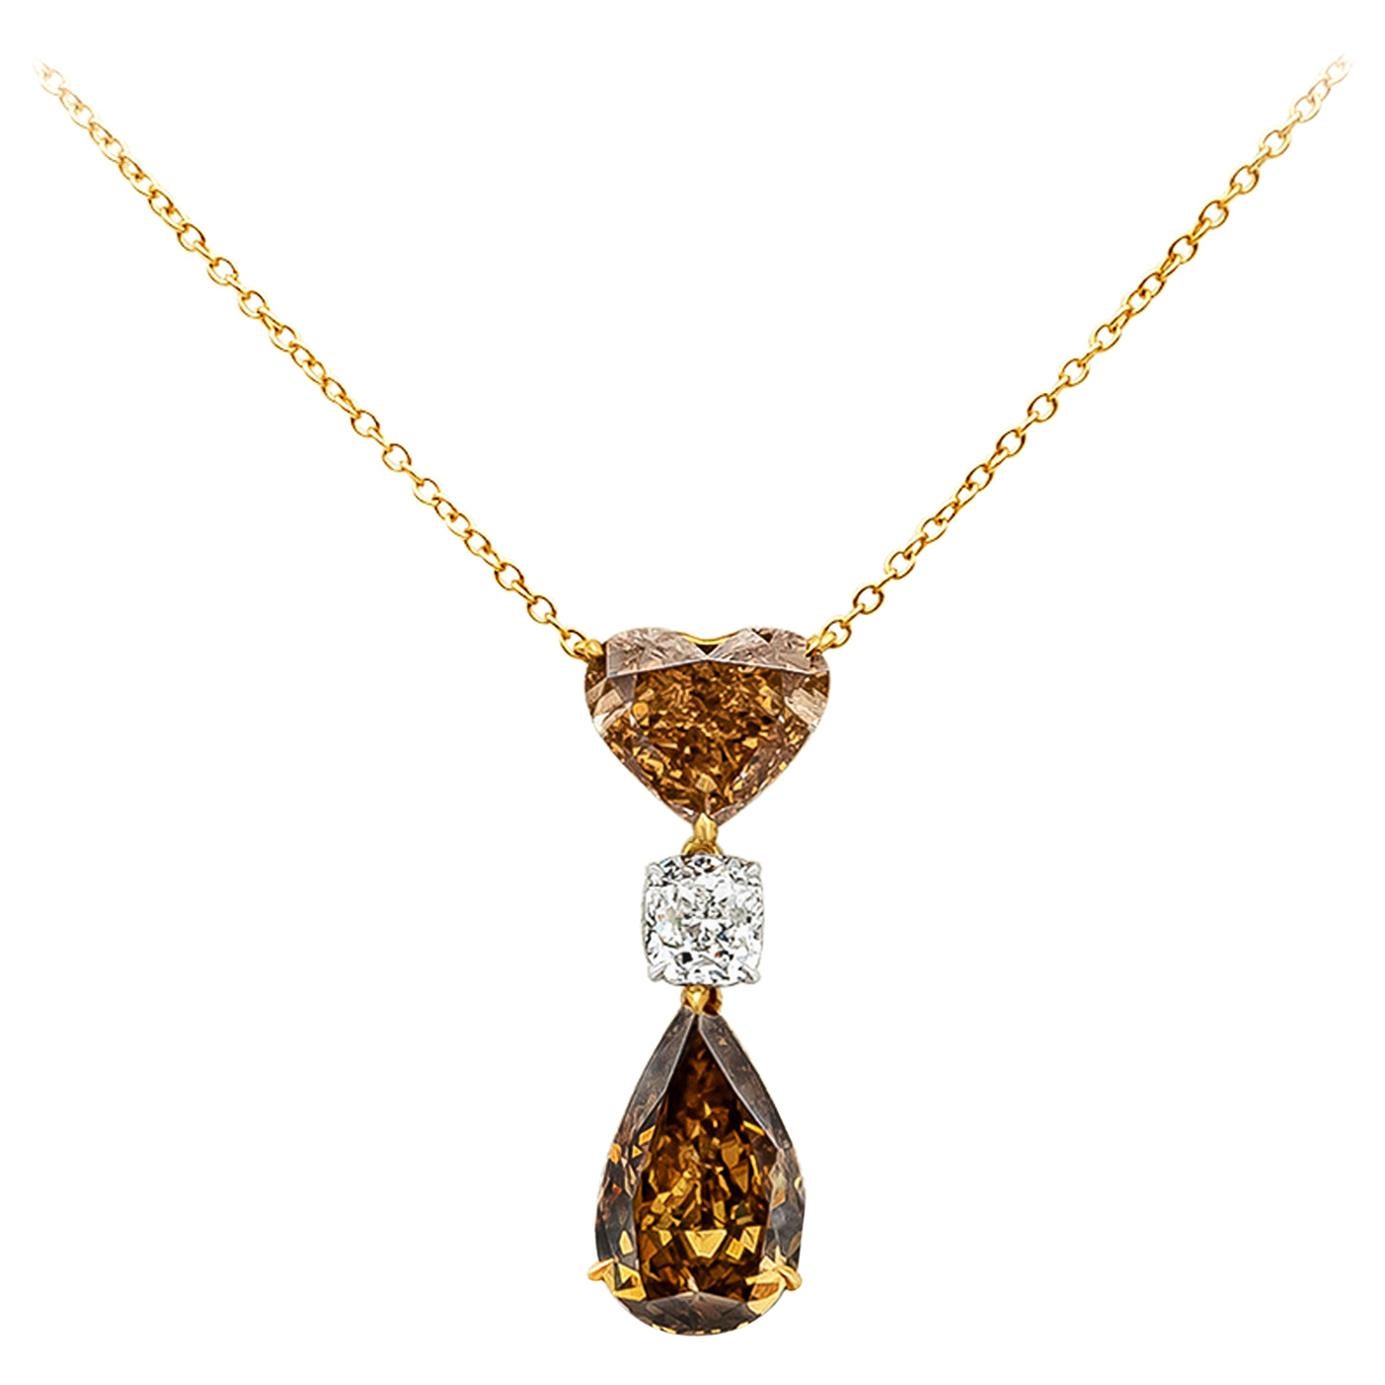 GIA Certified 9.29 Carats Total Mixed Cut Fancy Color Diamond Pendant Necklace For Sale